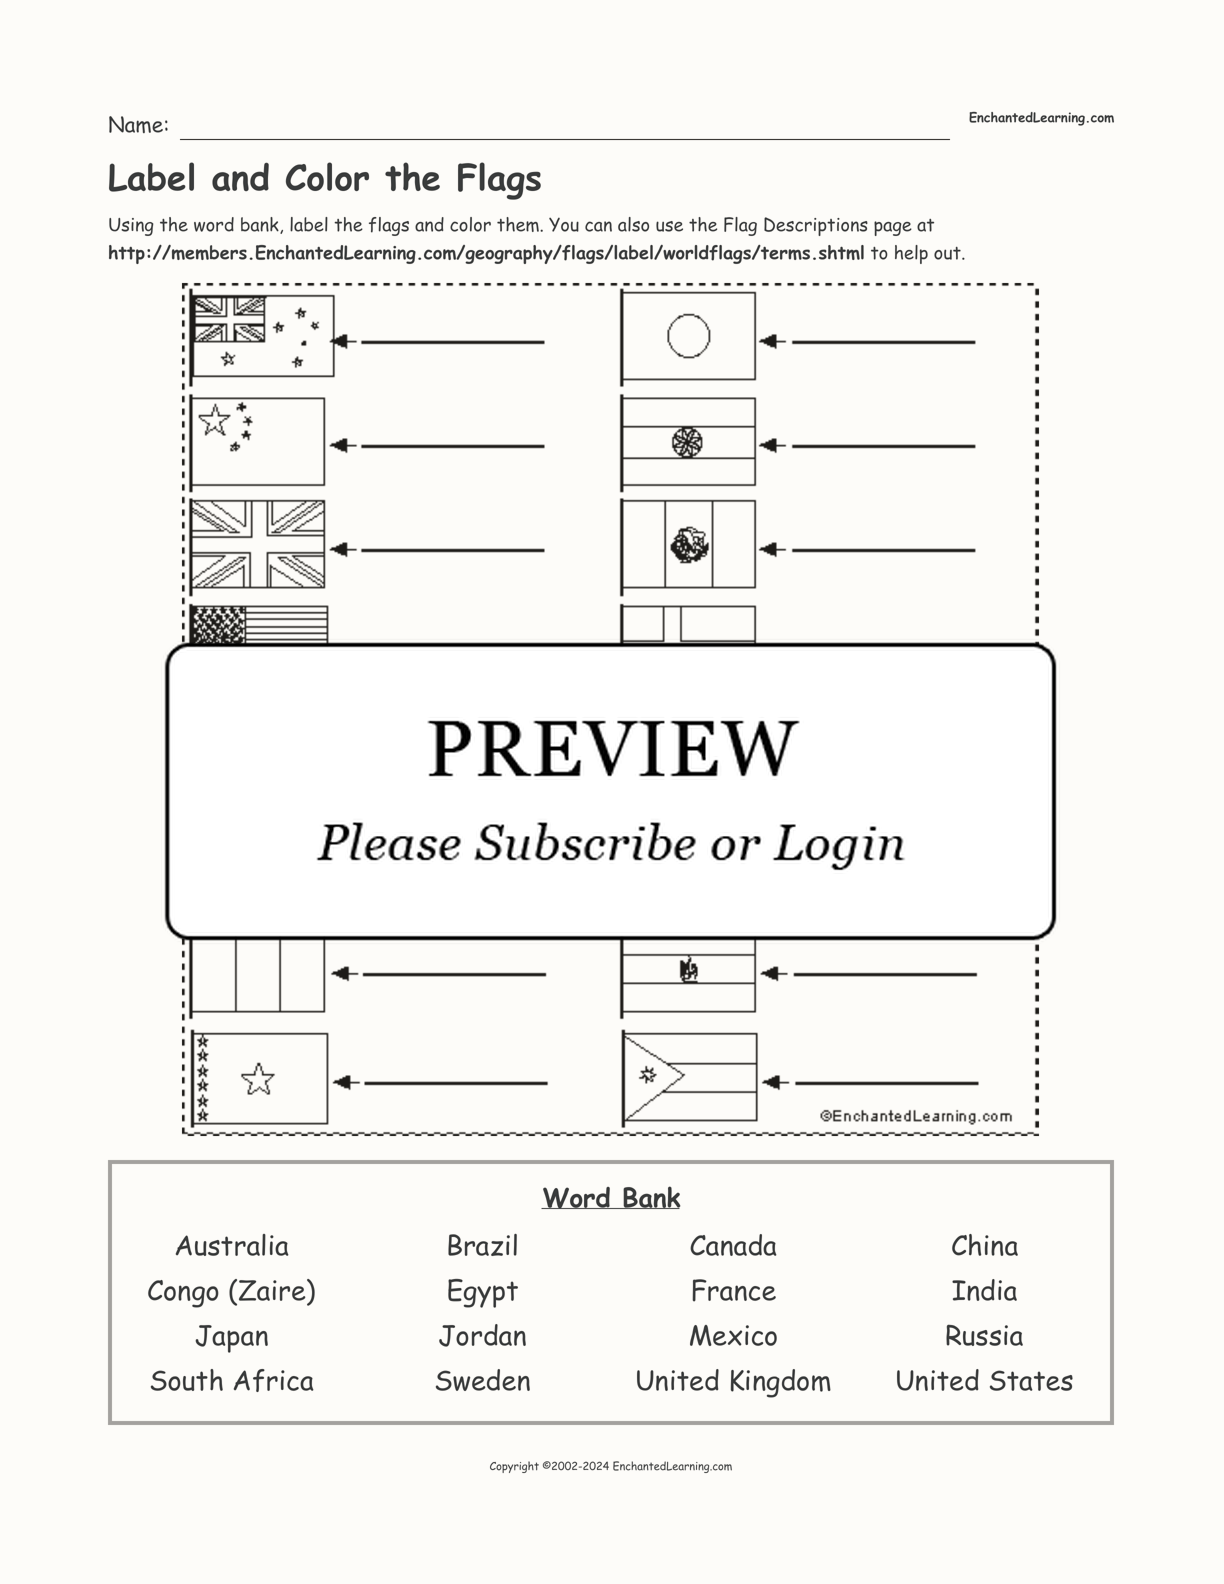 Label and Color the Flags interactive worksheet page 1